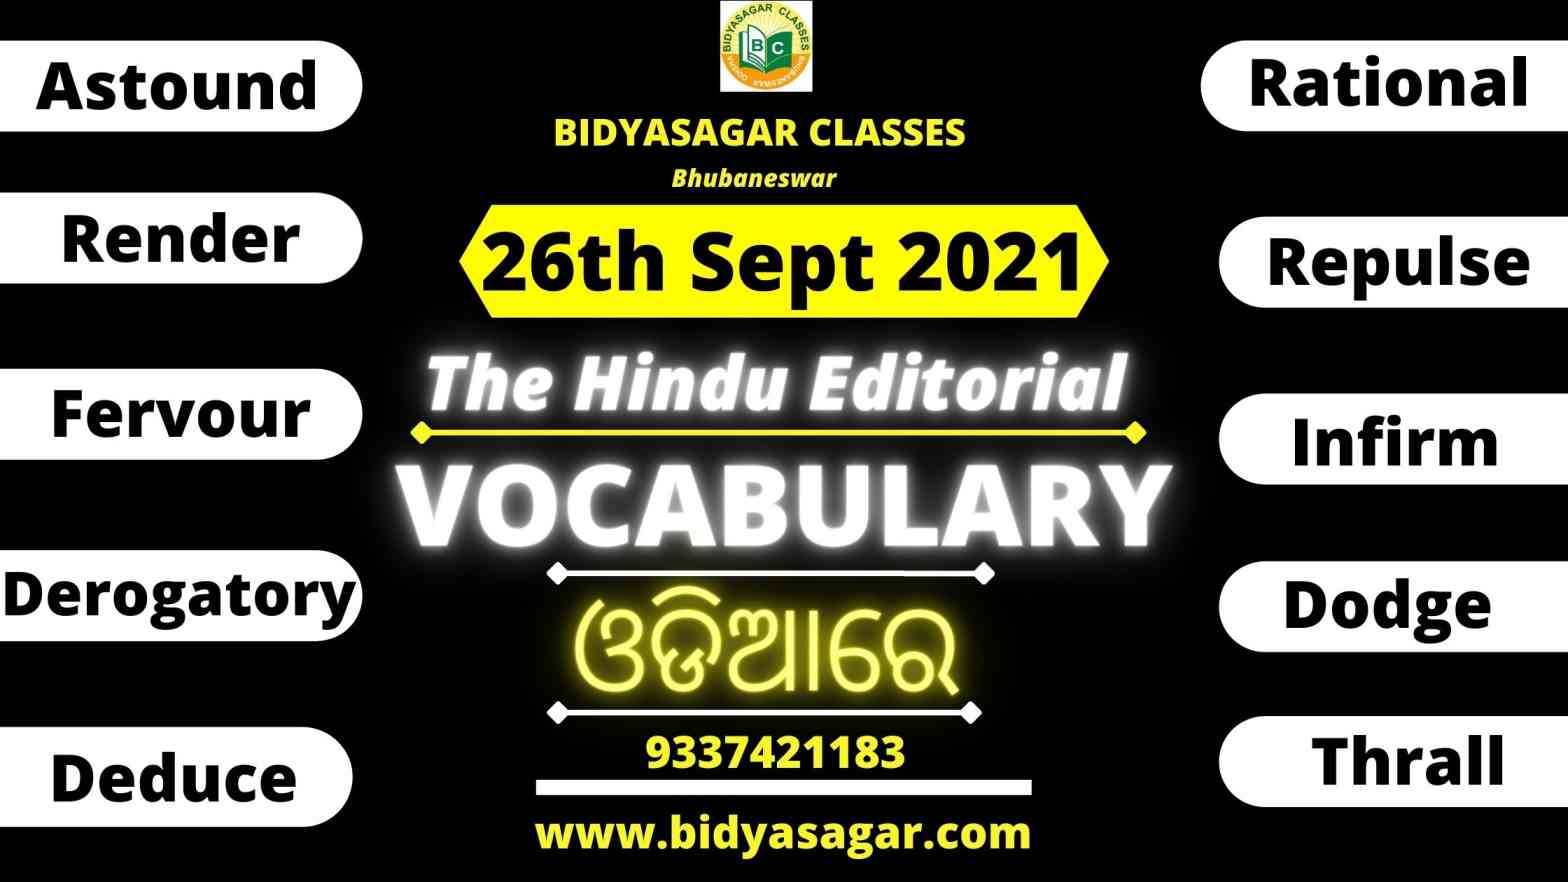 The Hindu Editorial Vocabulary of 26th September 2021